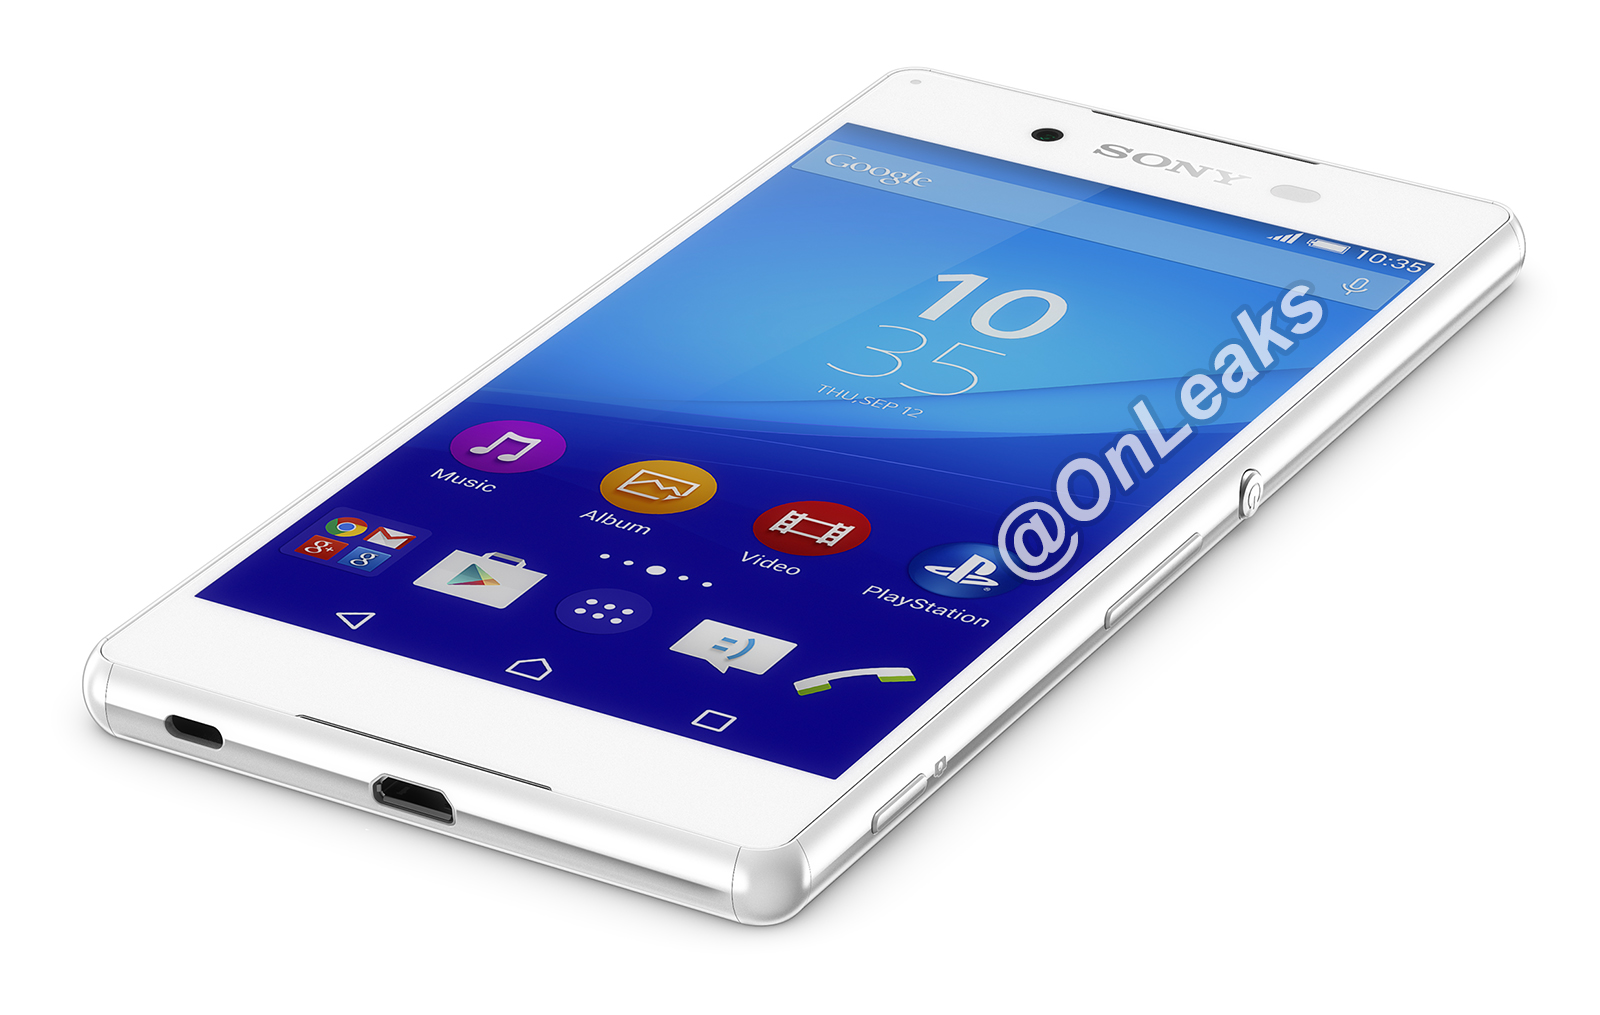 xperia z4 phone review